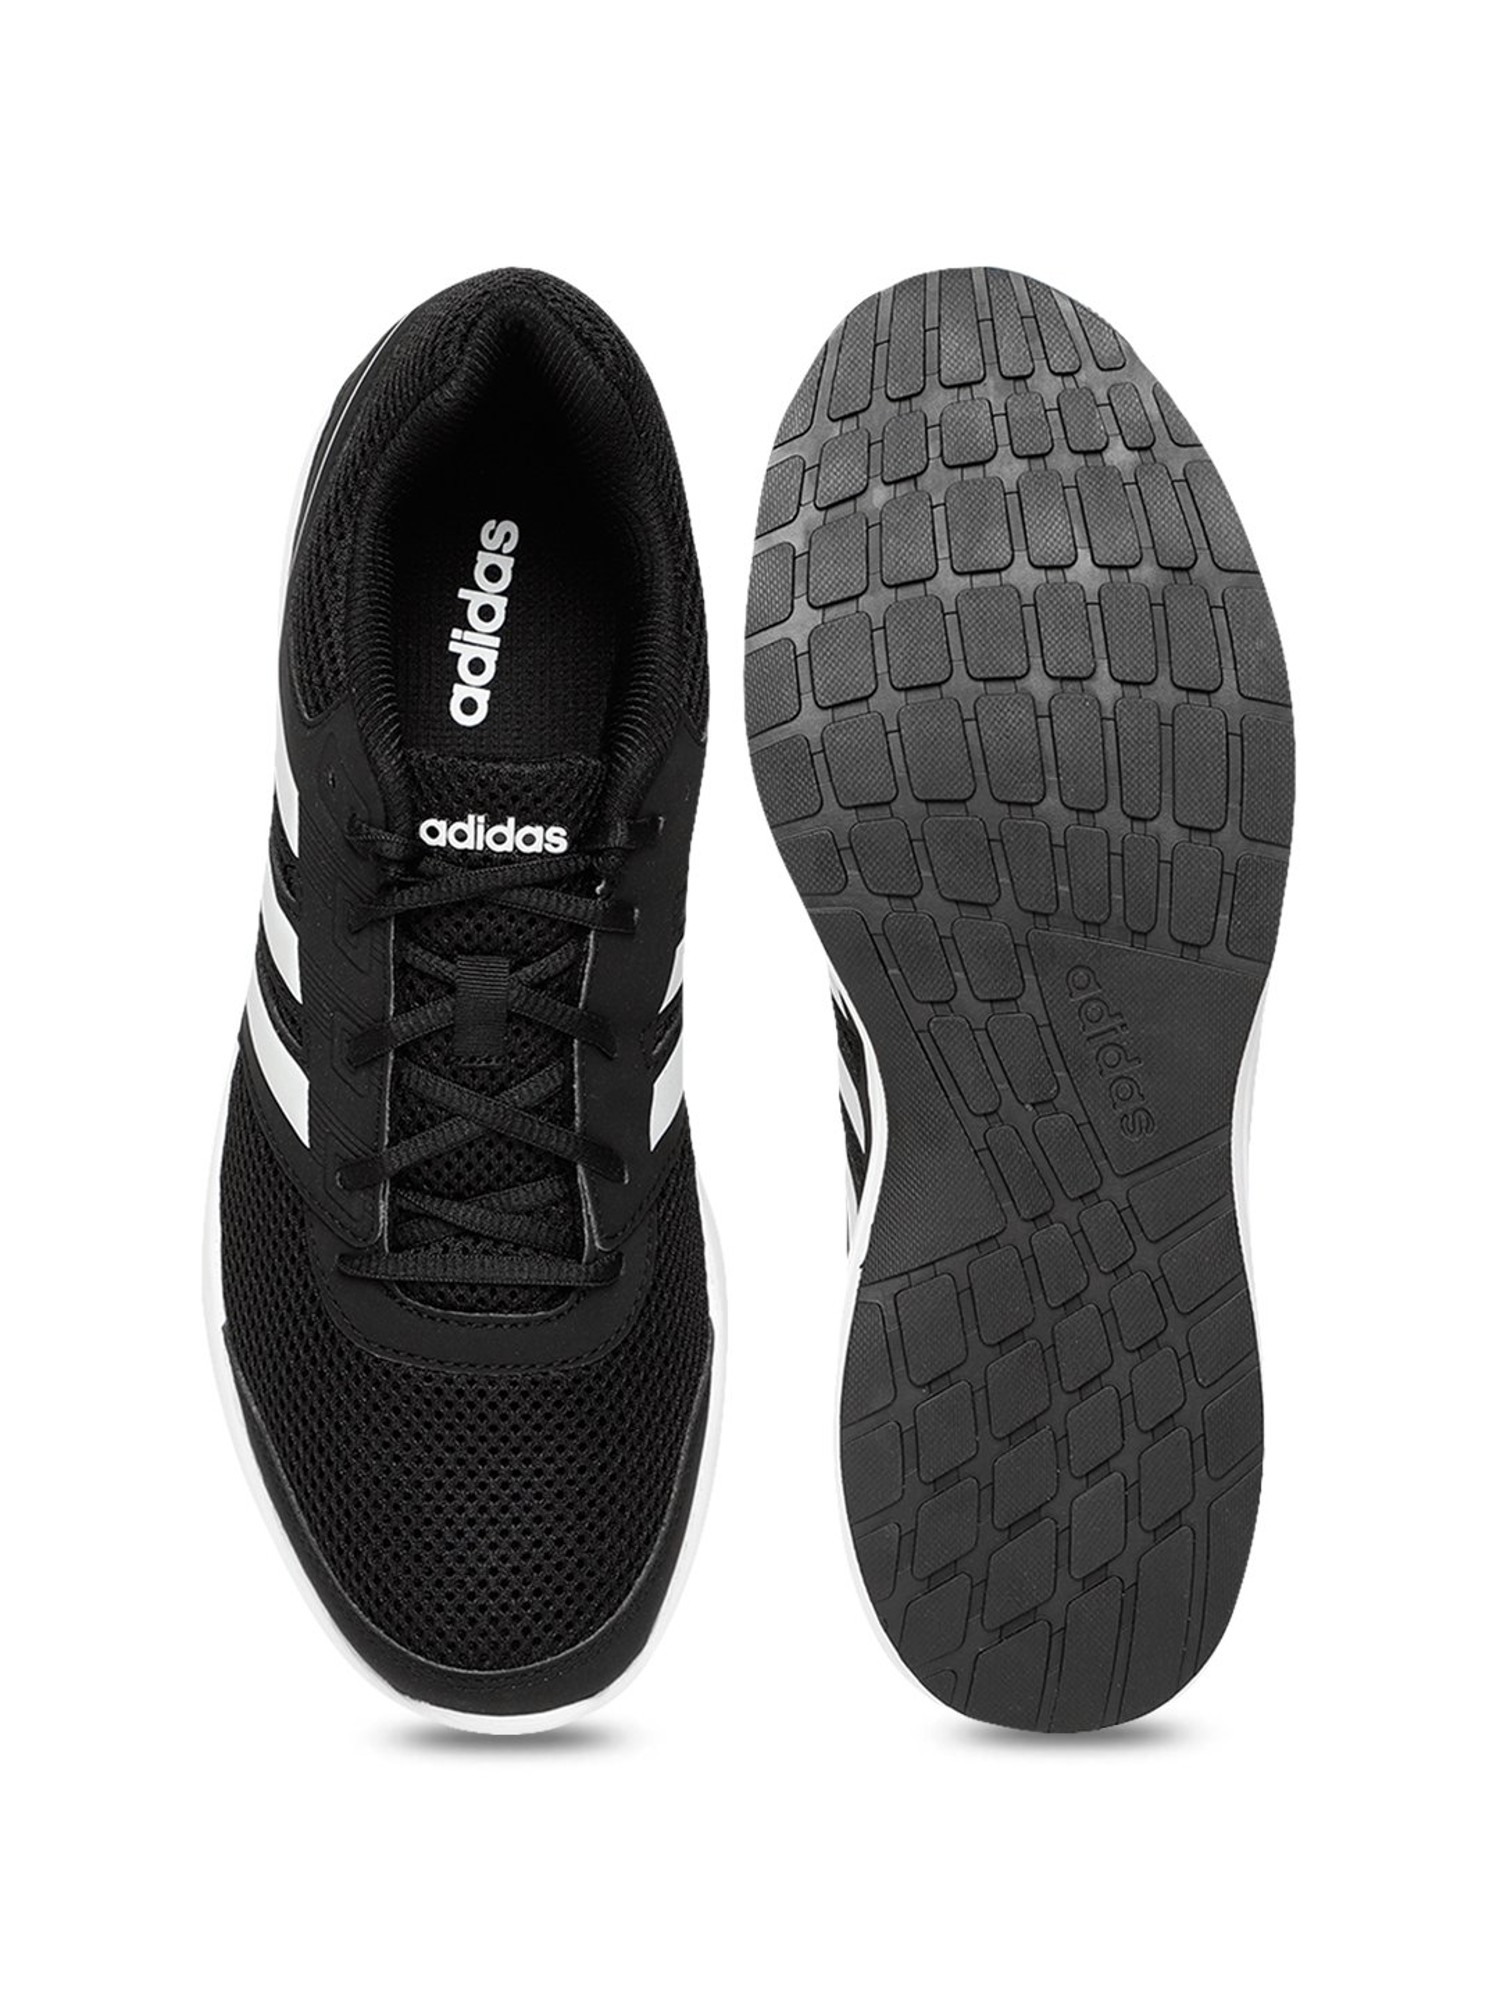 adidas hellion z running shoes review